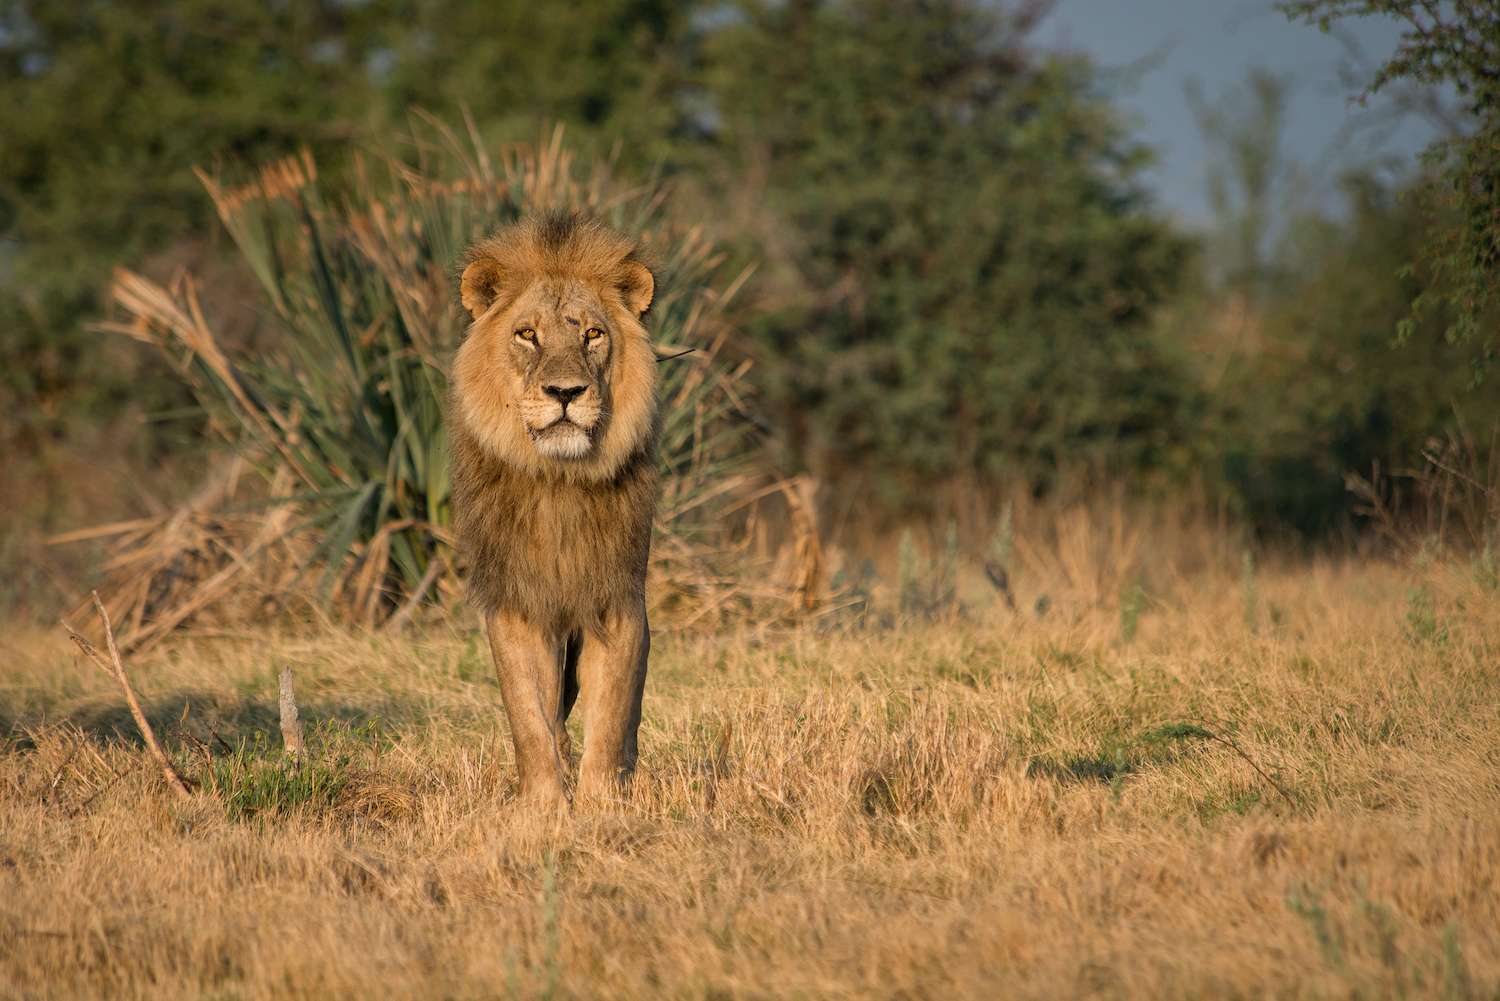 Male Lion looking out at viewer standing.